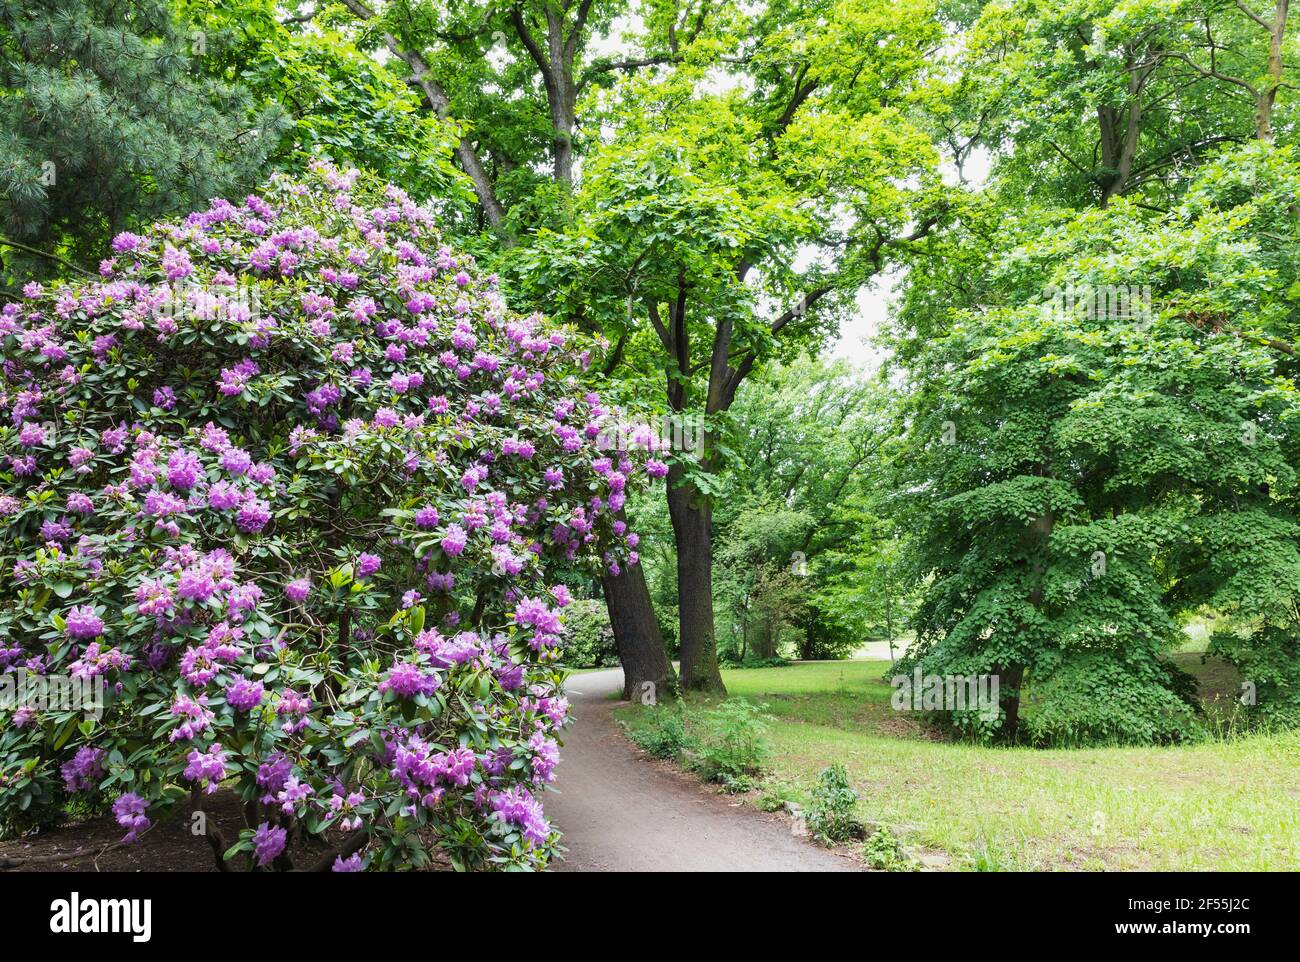 Germany, Saxony, Leipzig, Large rhododendron bush flowering in Palmengarten park with oak trees in background Stock Photo